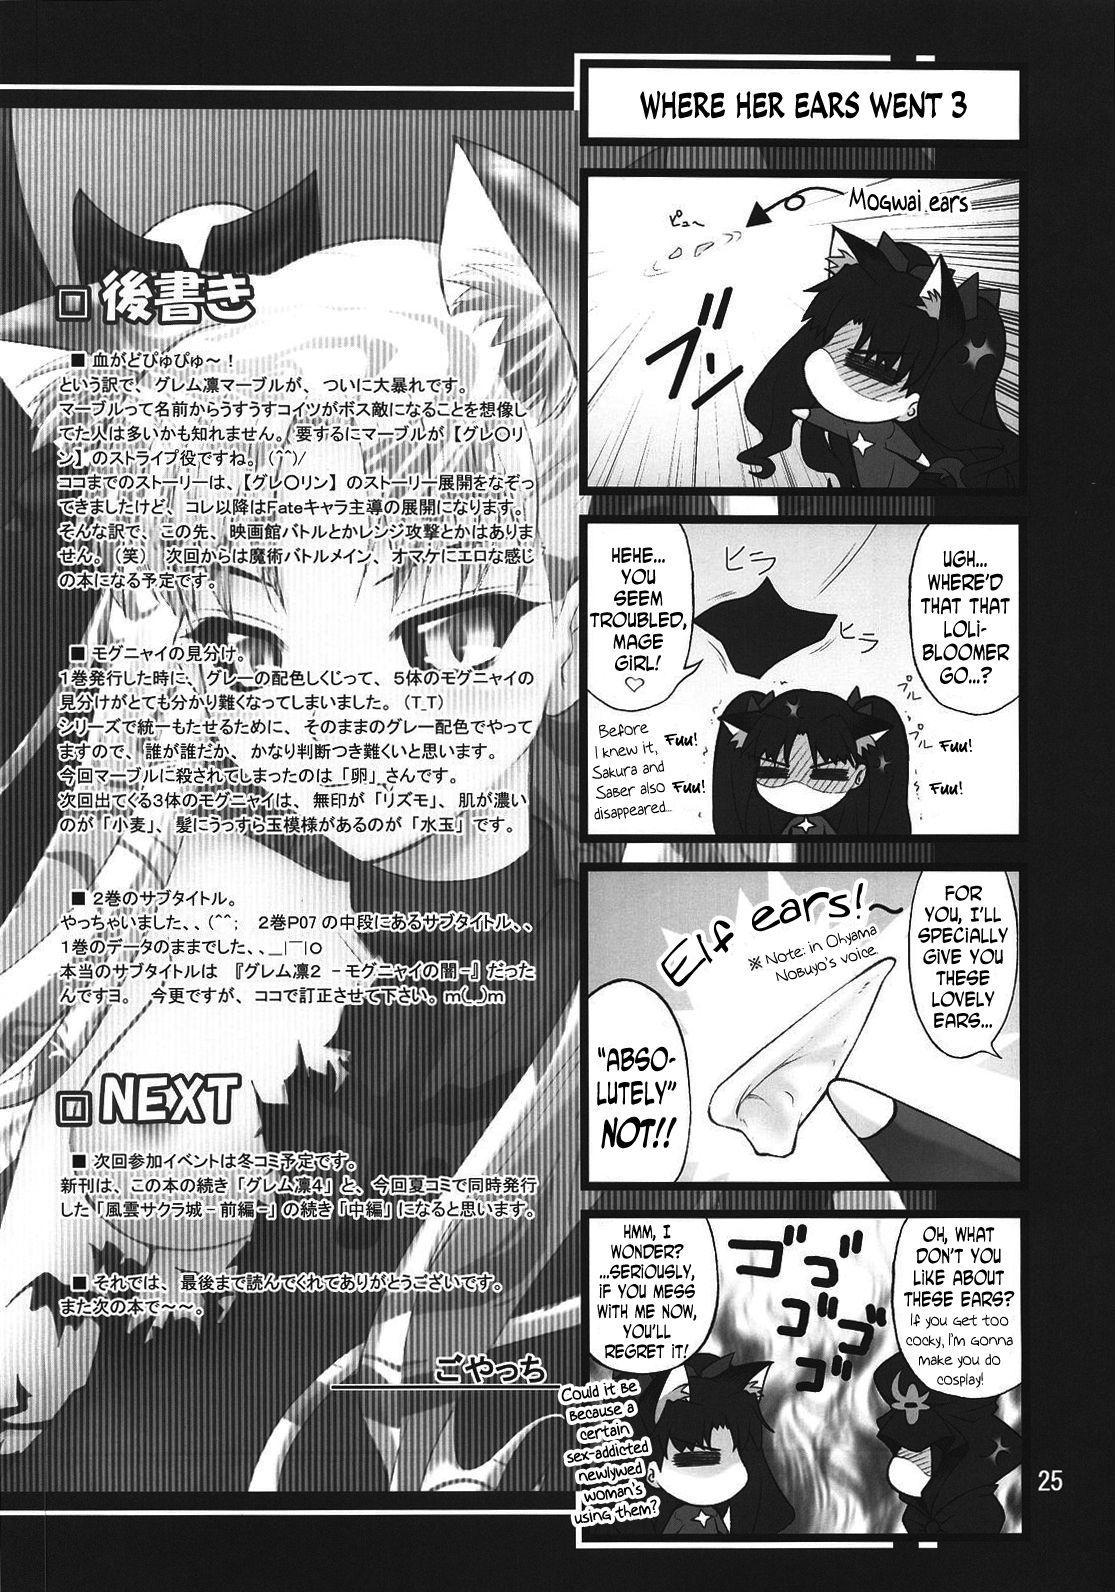 Jerking Grem-Rin 3 - Fate stay night Free Amatuer Porn - Page 24